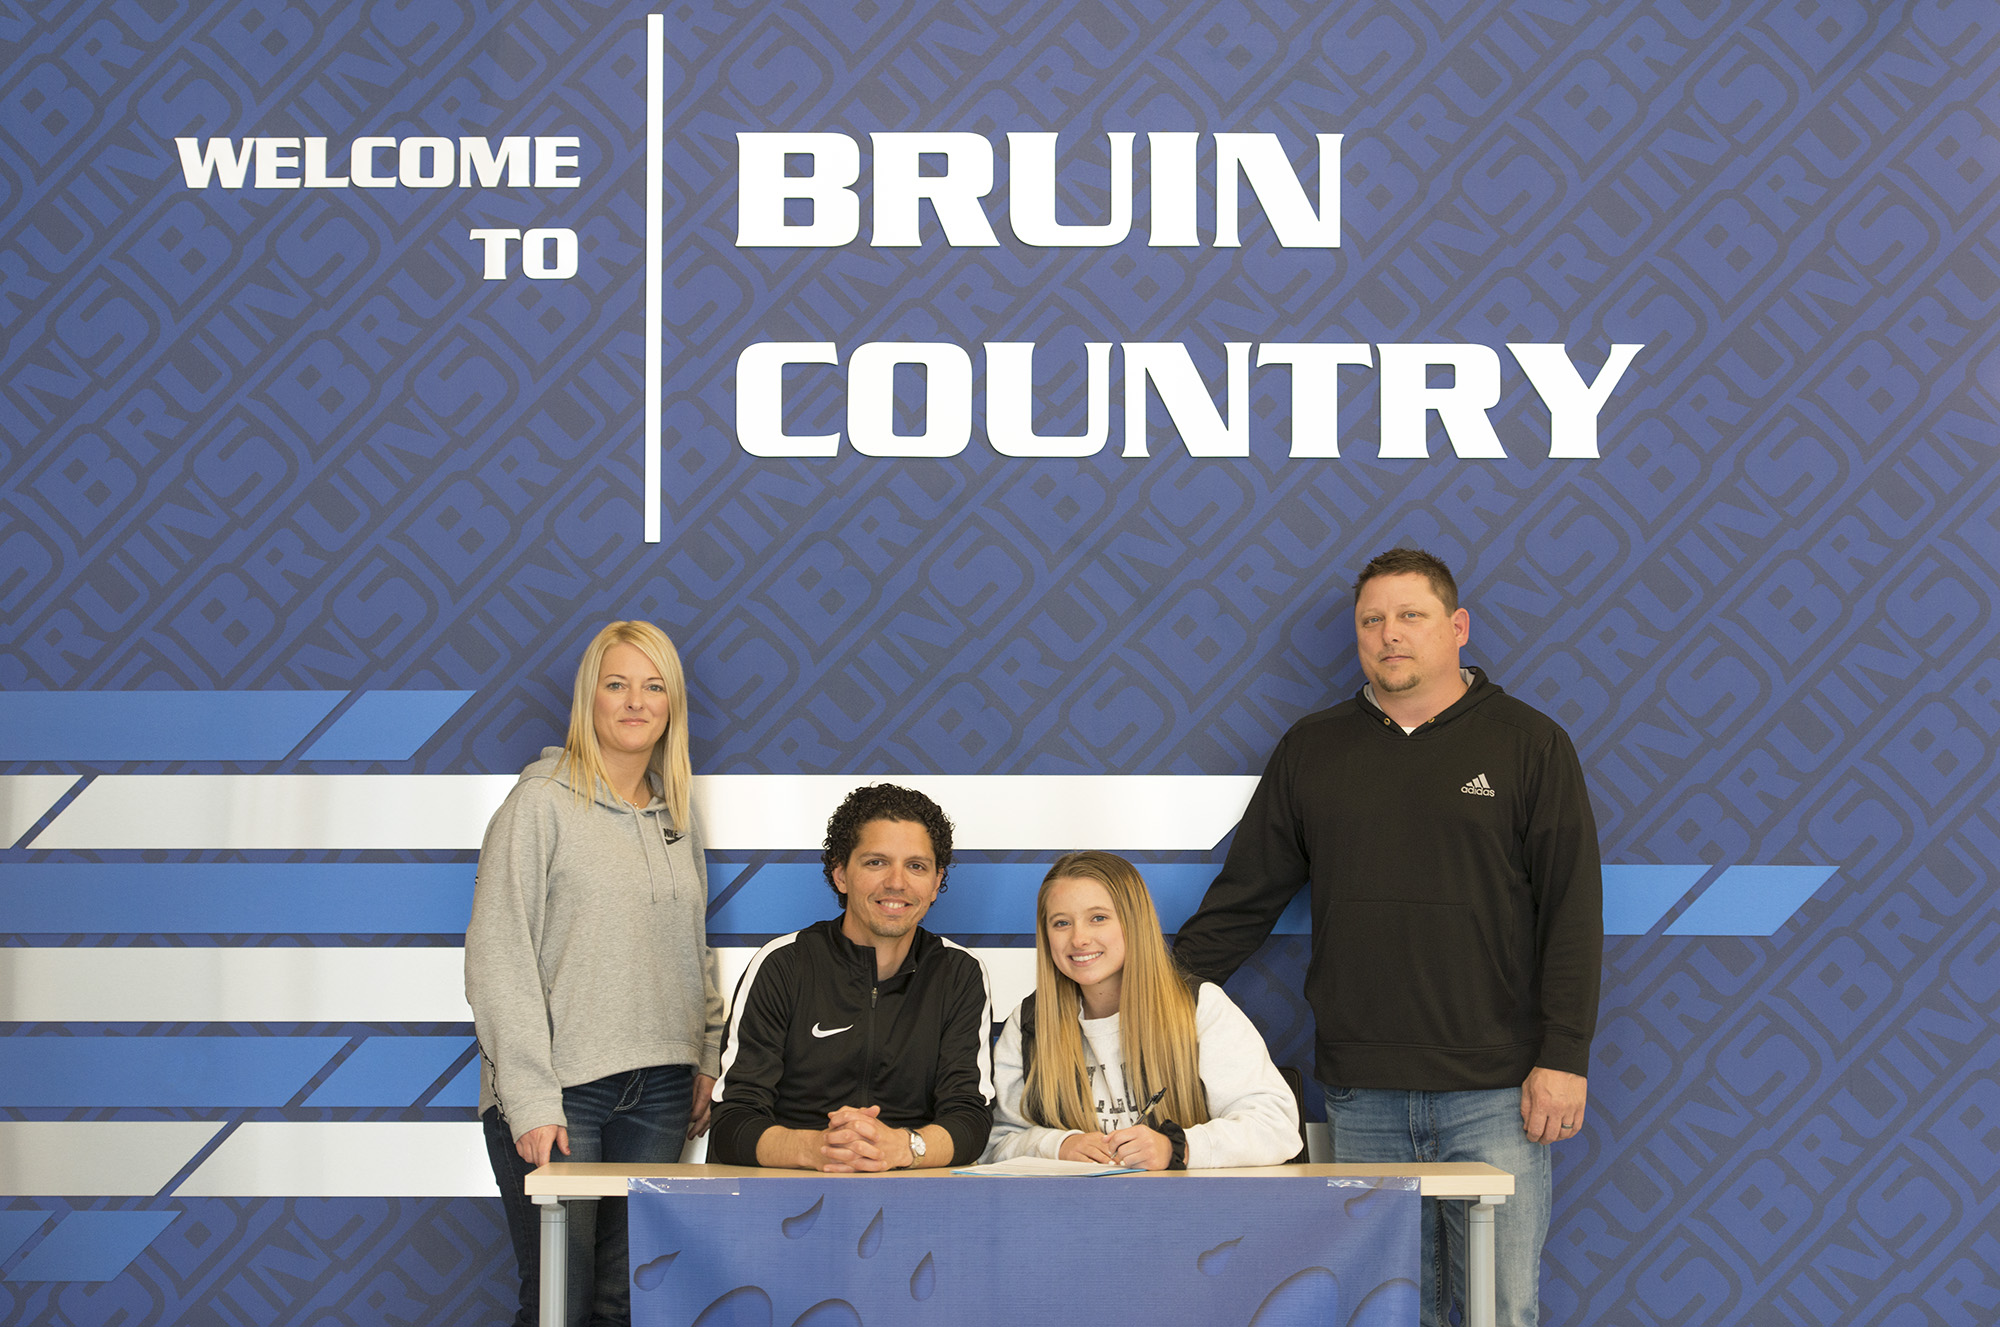 Pictured, from left to right, are Danielle Willis (mother), Head Women's Soccer Coach Eierí Salivia, Baylee Willis and Mitch Willis (father).